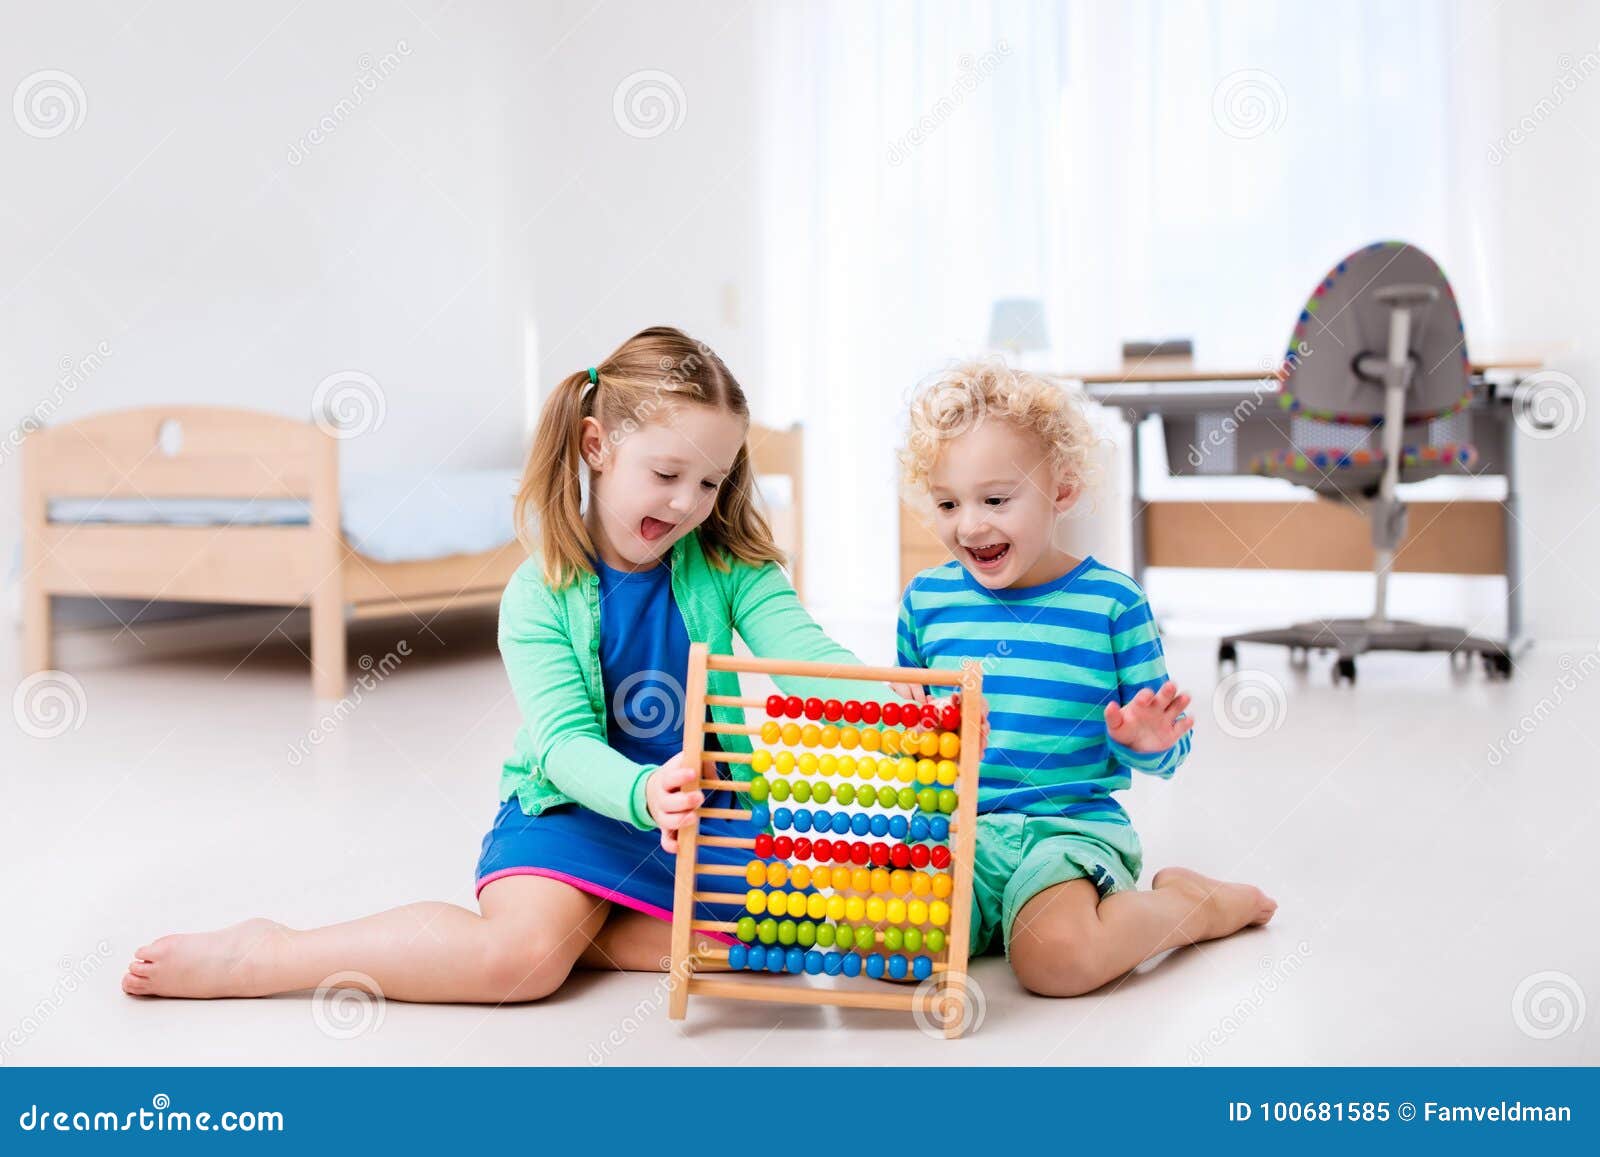 Kids Playing With Wooden Abacus Educational Toy Stock Image